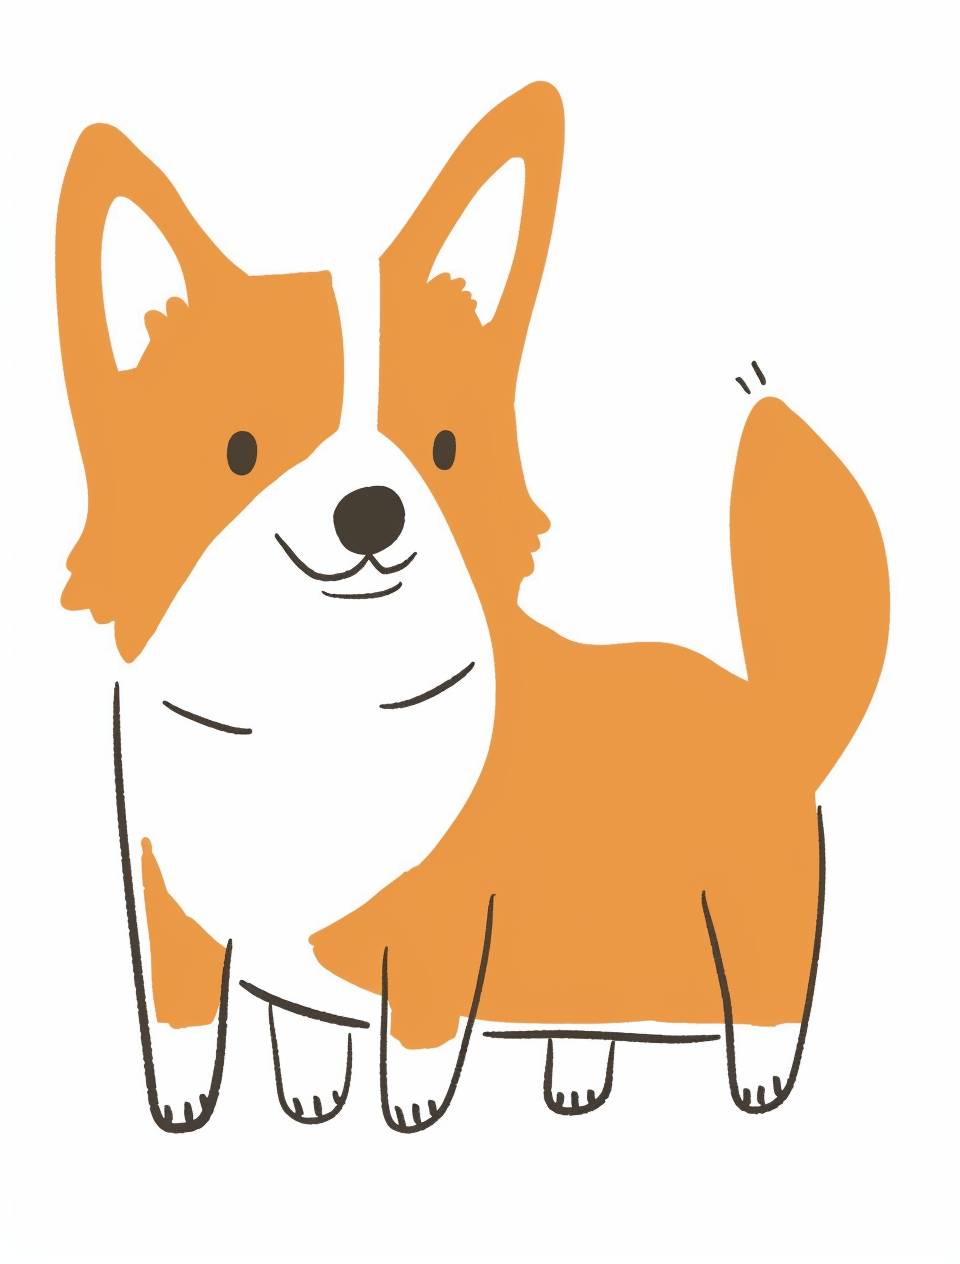 Simple and cute illustration of an orange and white corgi dog, using simple shapes in doodle style on a white background with bold hand-drawn lines, featuring a happy expression cartoon character design in the style of Ryo Takemasa.